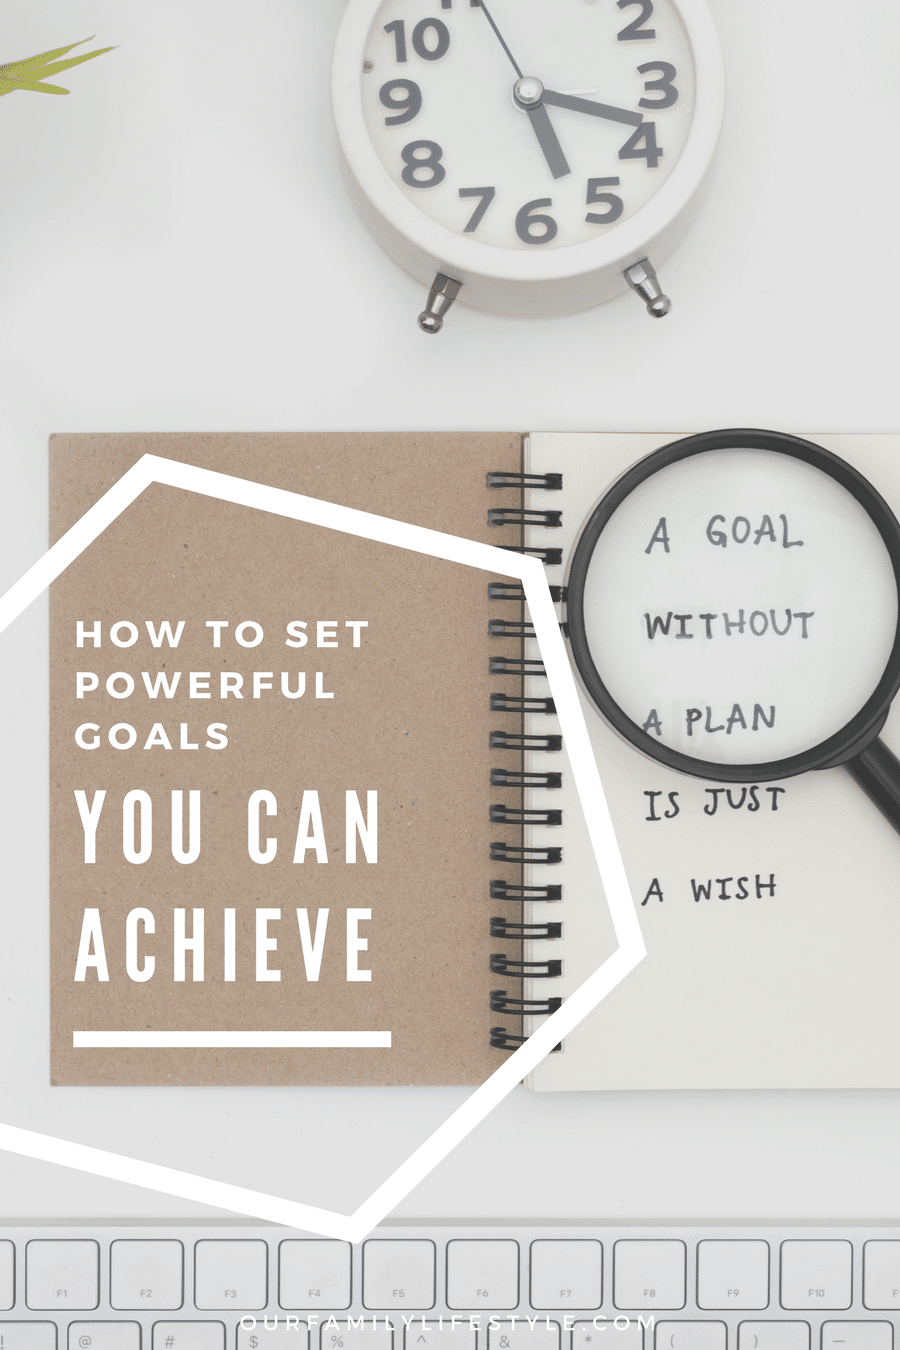 How to Set Powerful Goals You Can Achieve